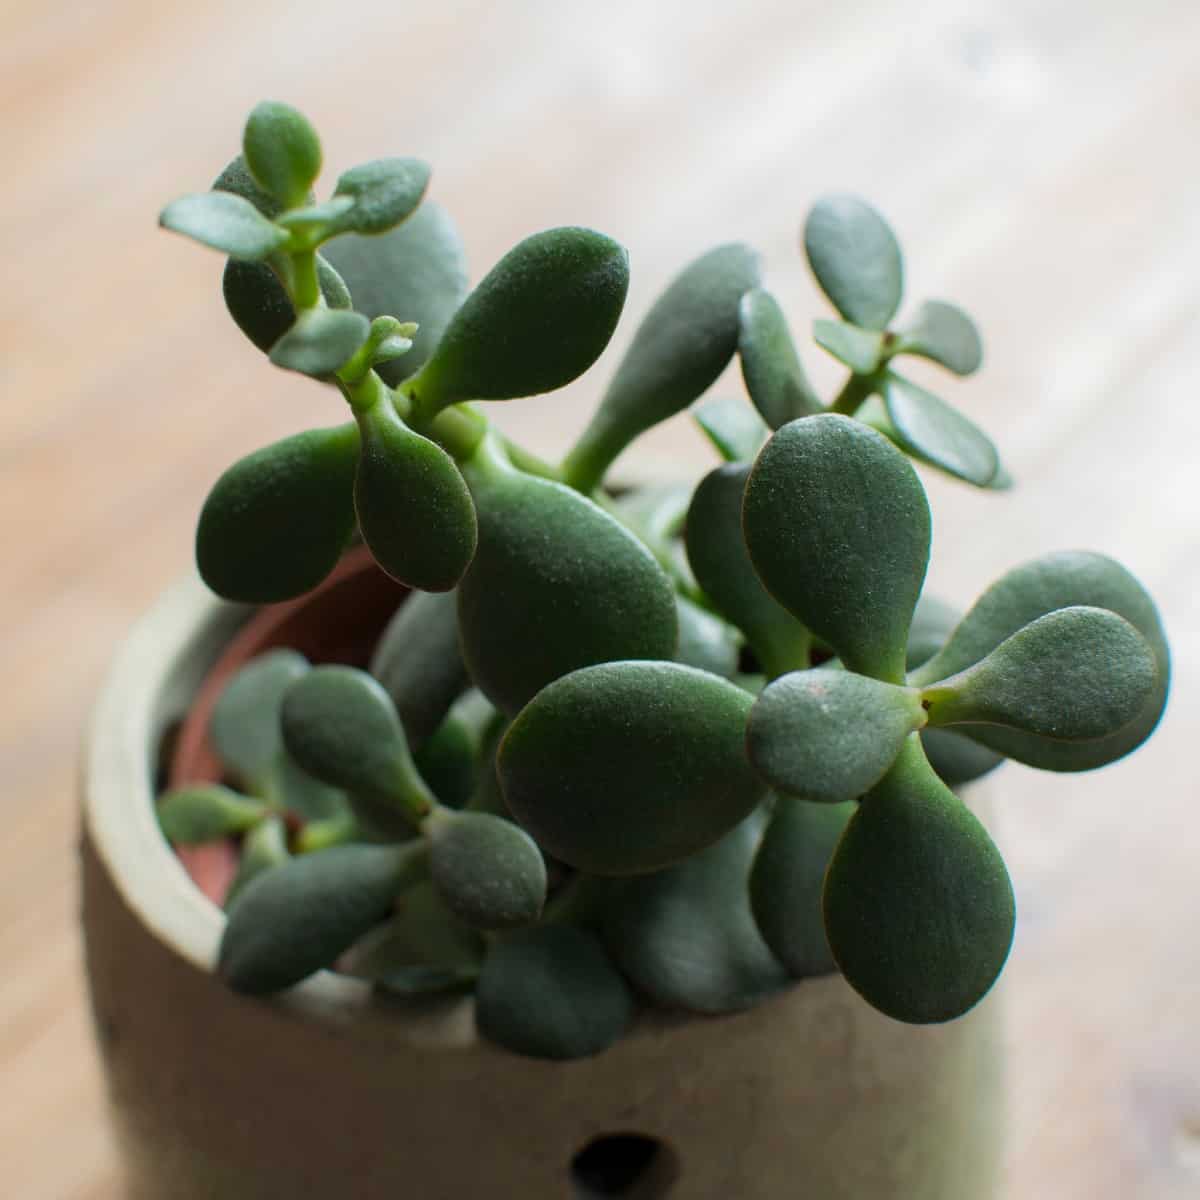 The jade or money plant is a pretty succulent.